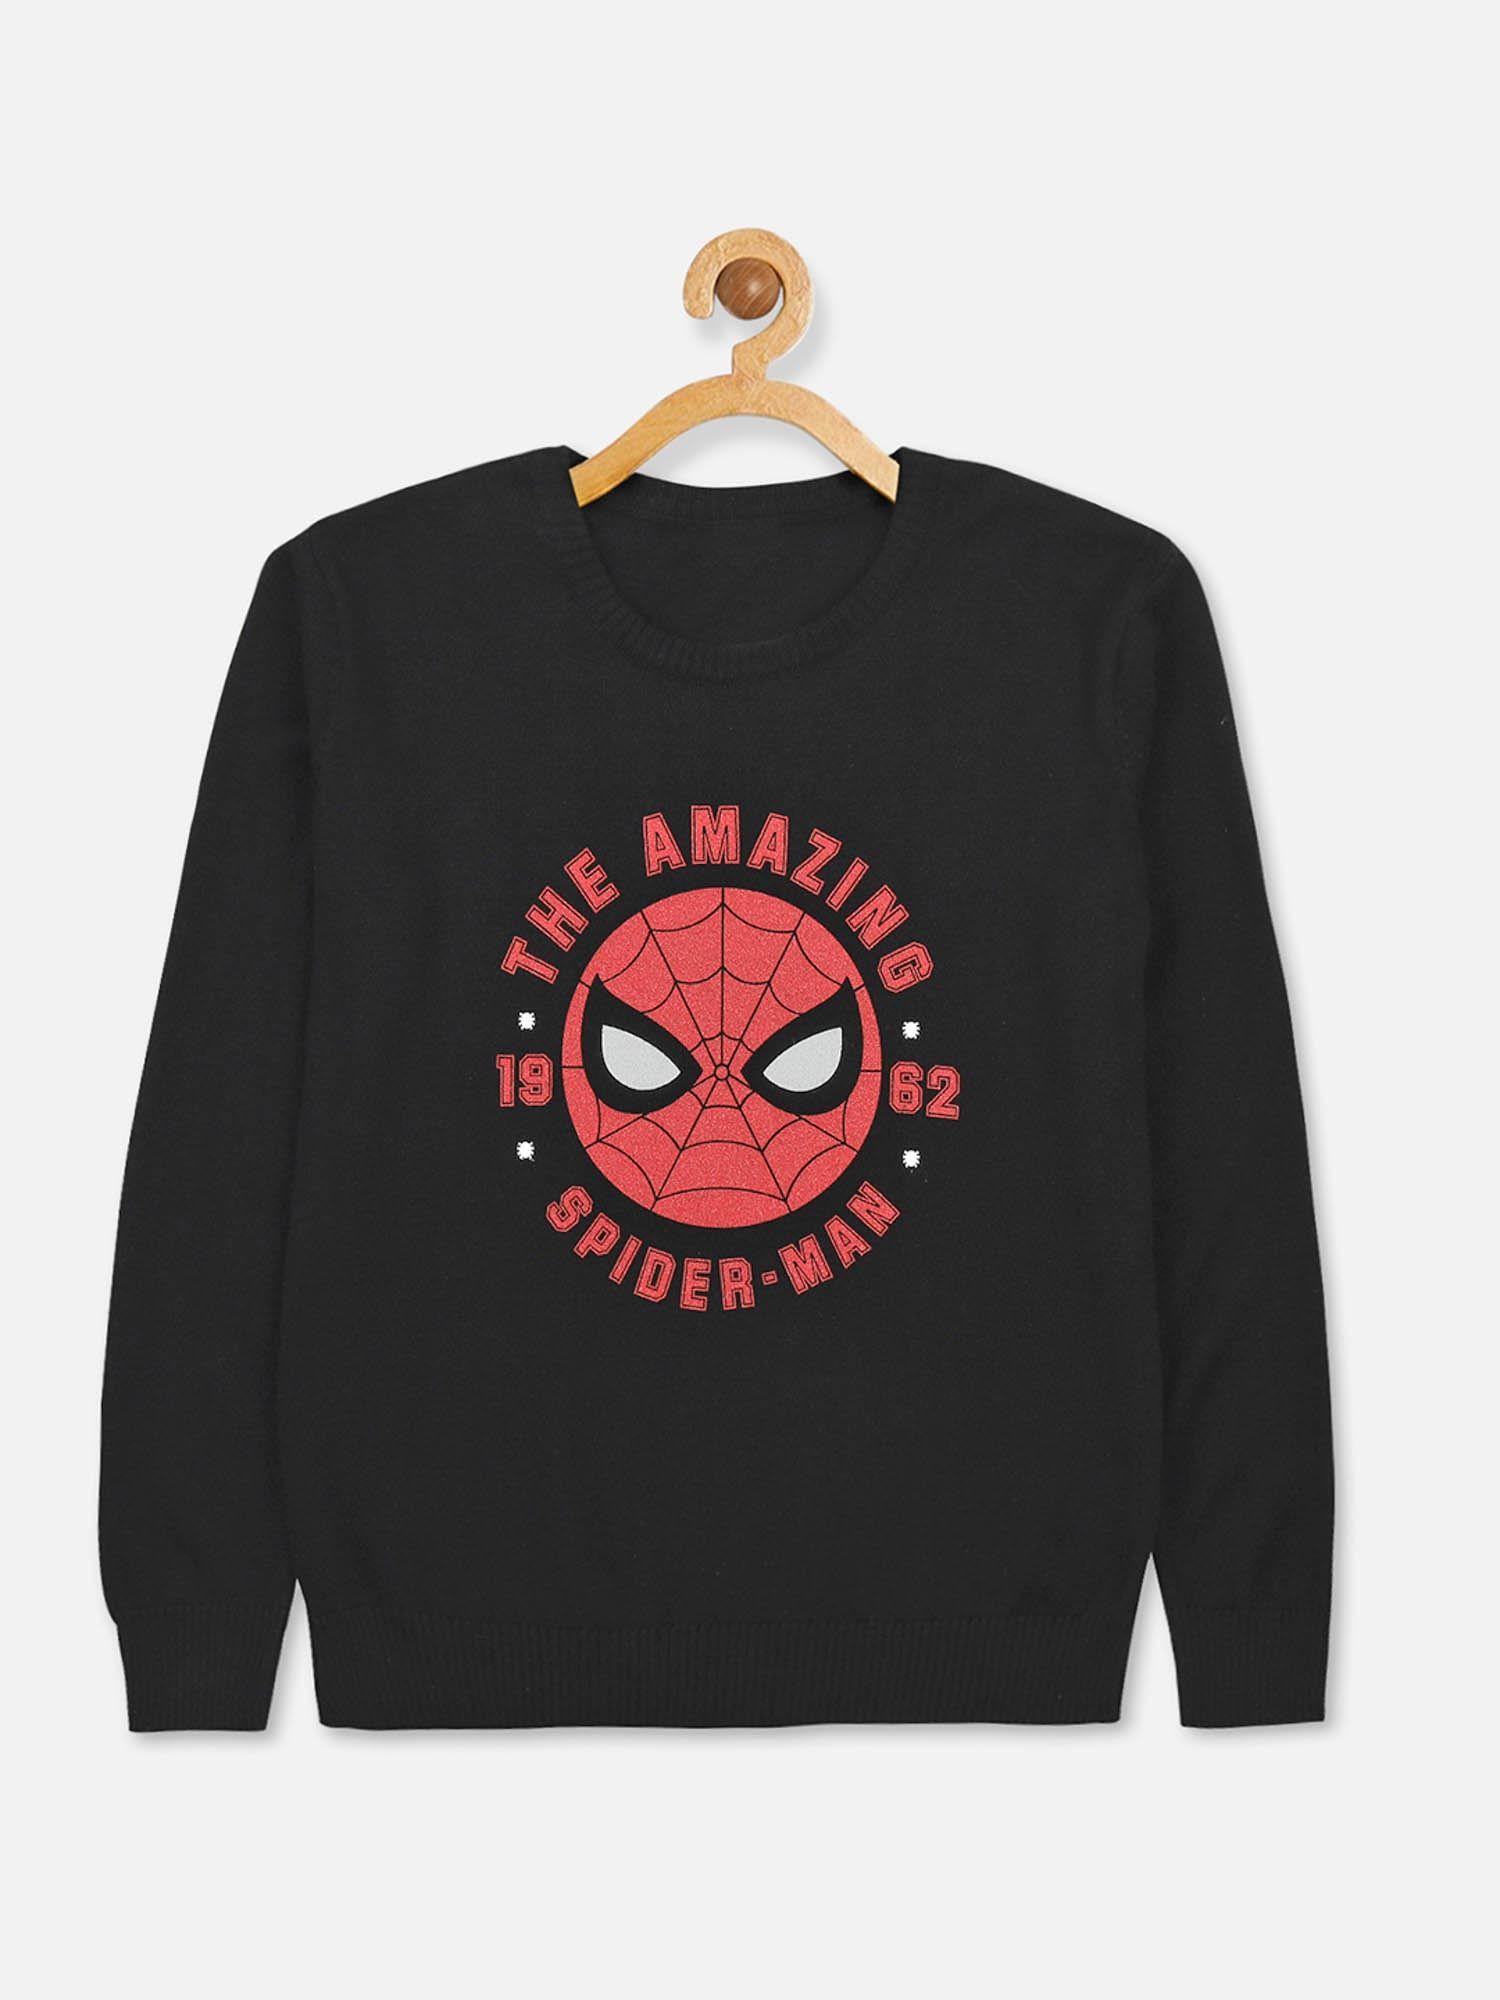 spiderman-printed-black-sweater-for-boys